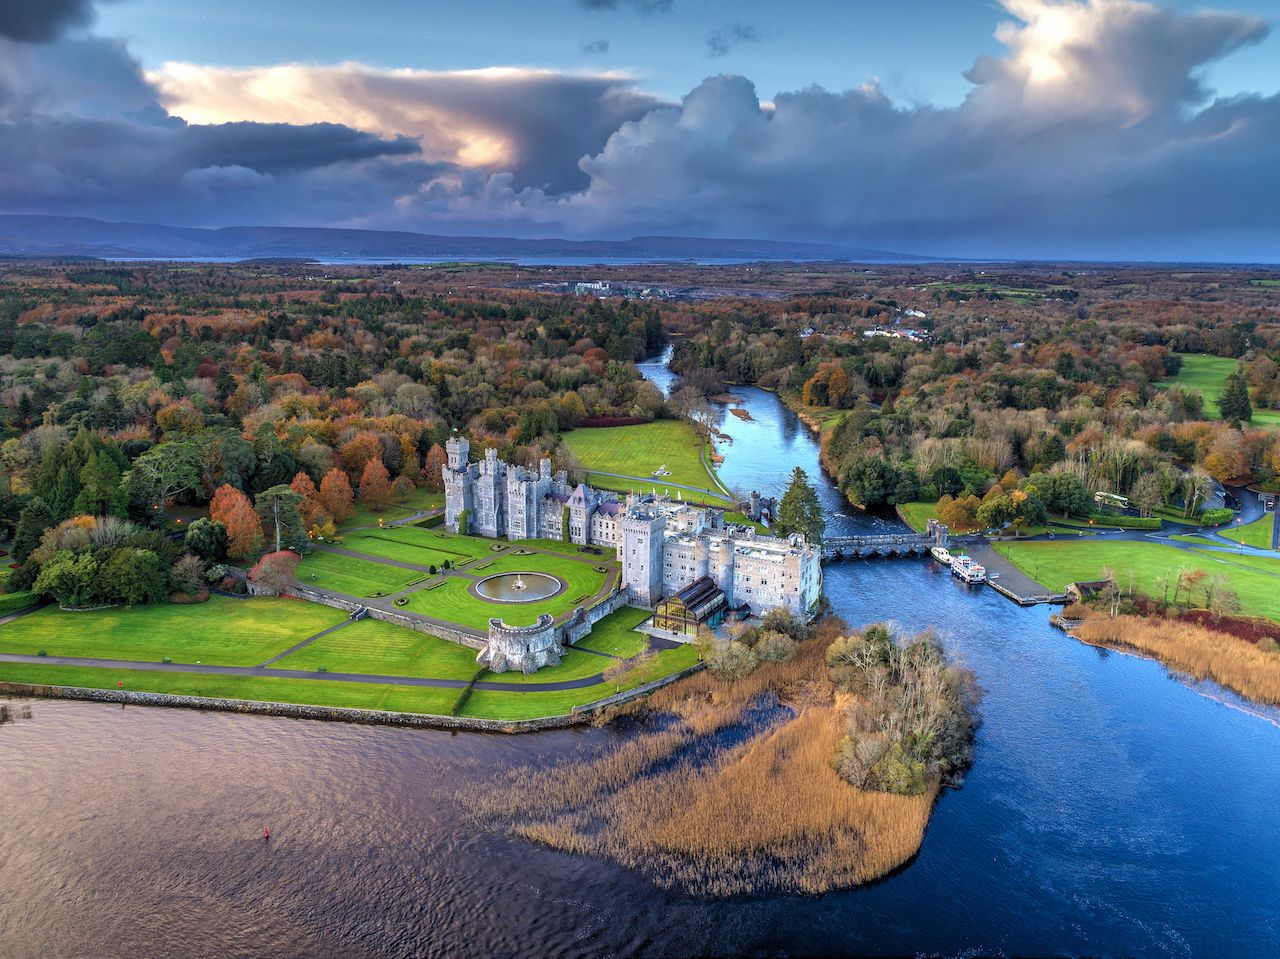 Luxury Ashford Castle and Gardens from above